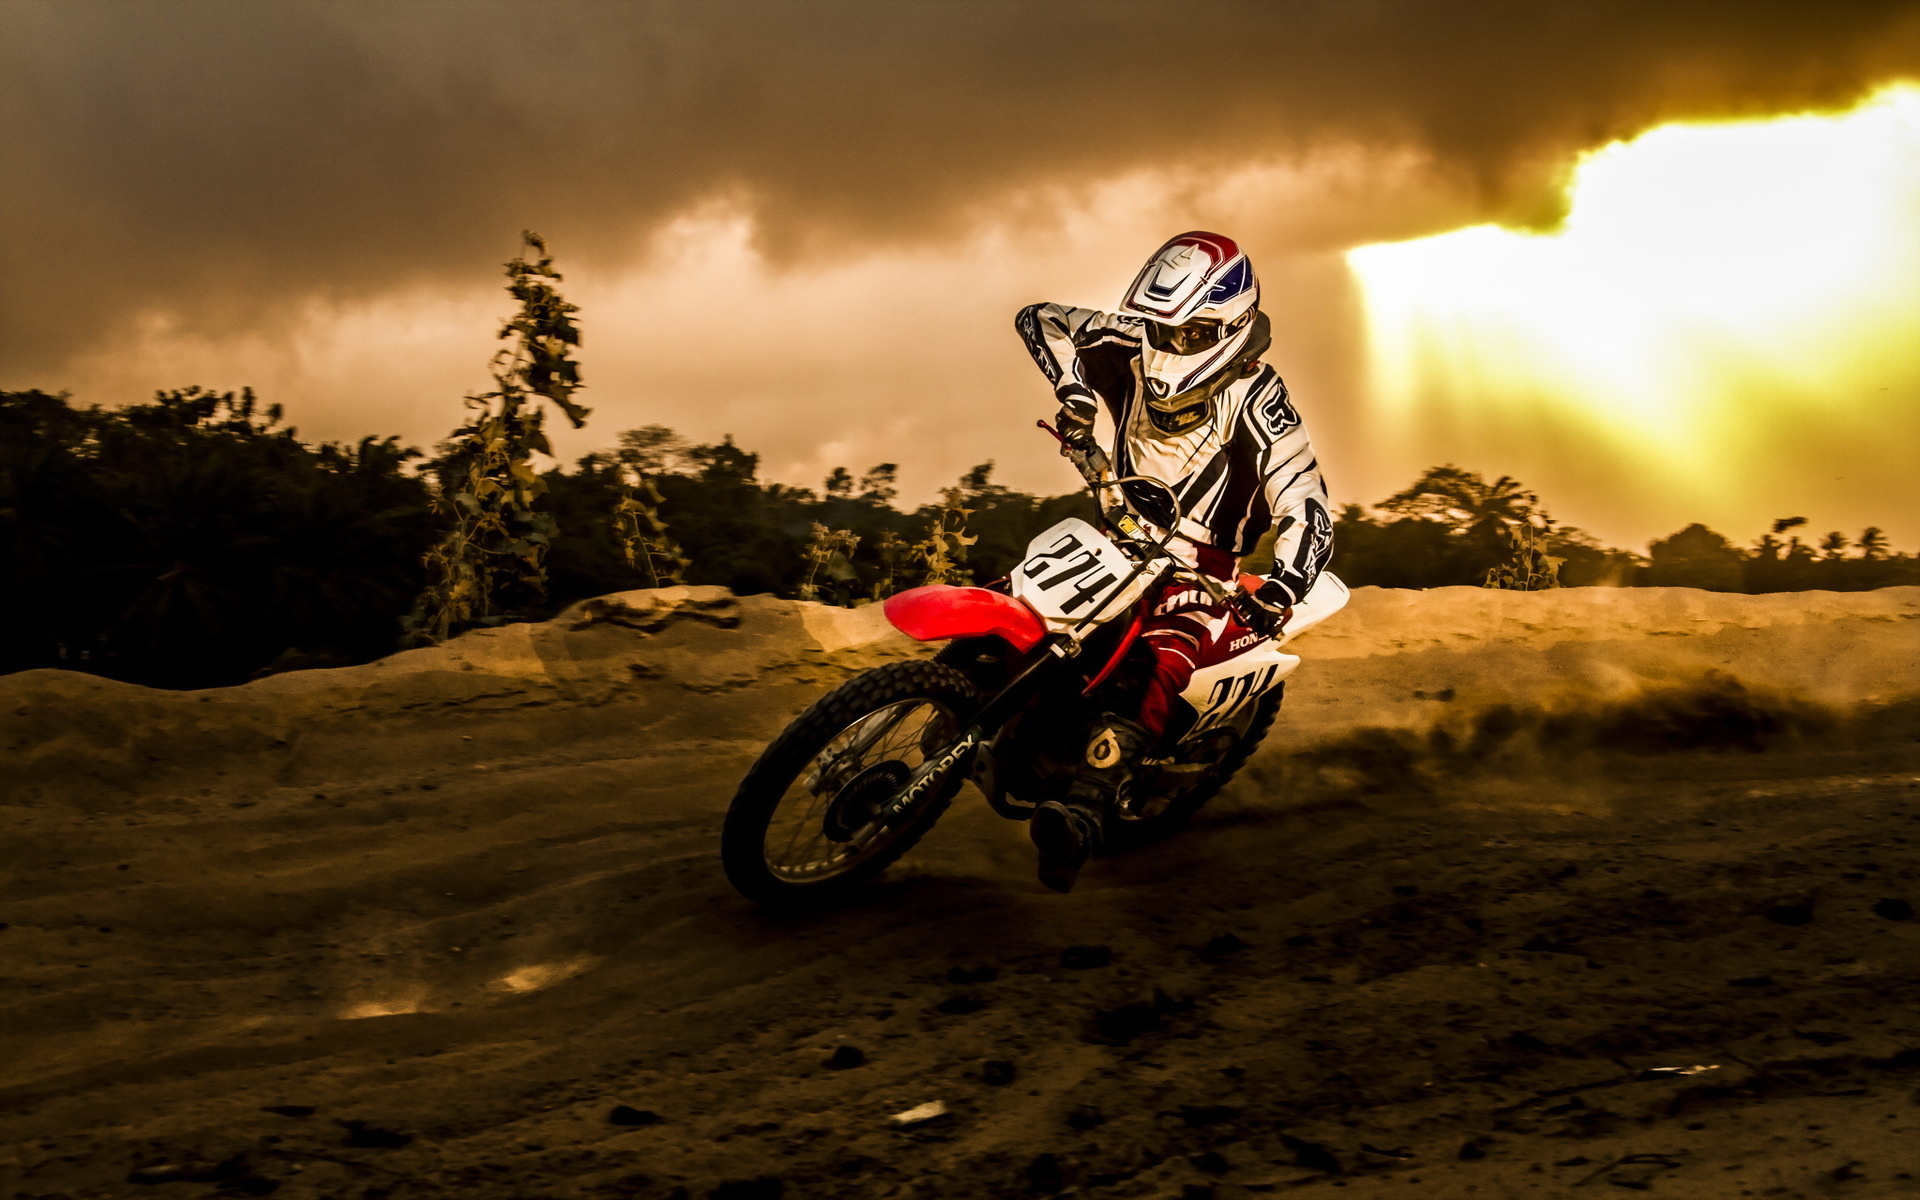 Motorcycle Racing: Motocross, Dirt Race on the Sunset, Pitbike, Enduro. 1920x1200 HD Background.